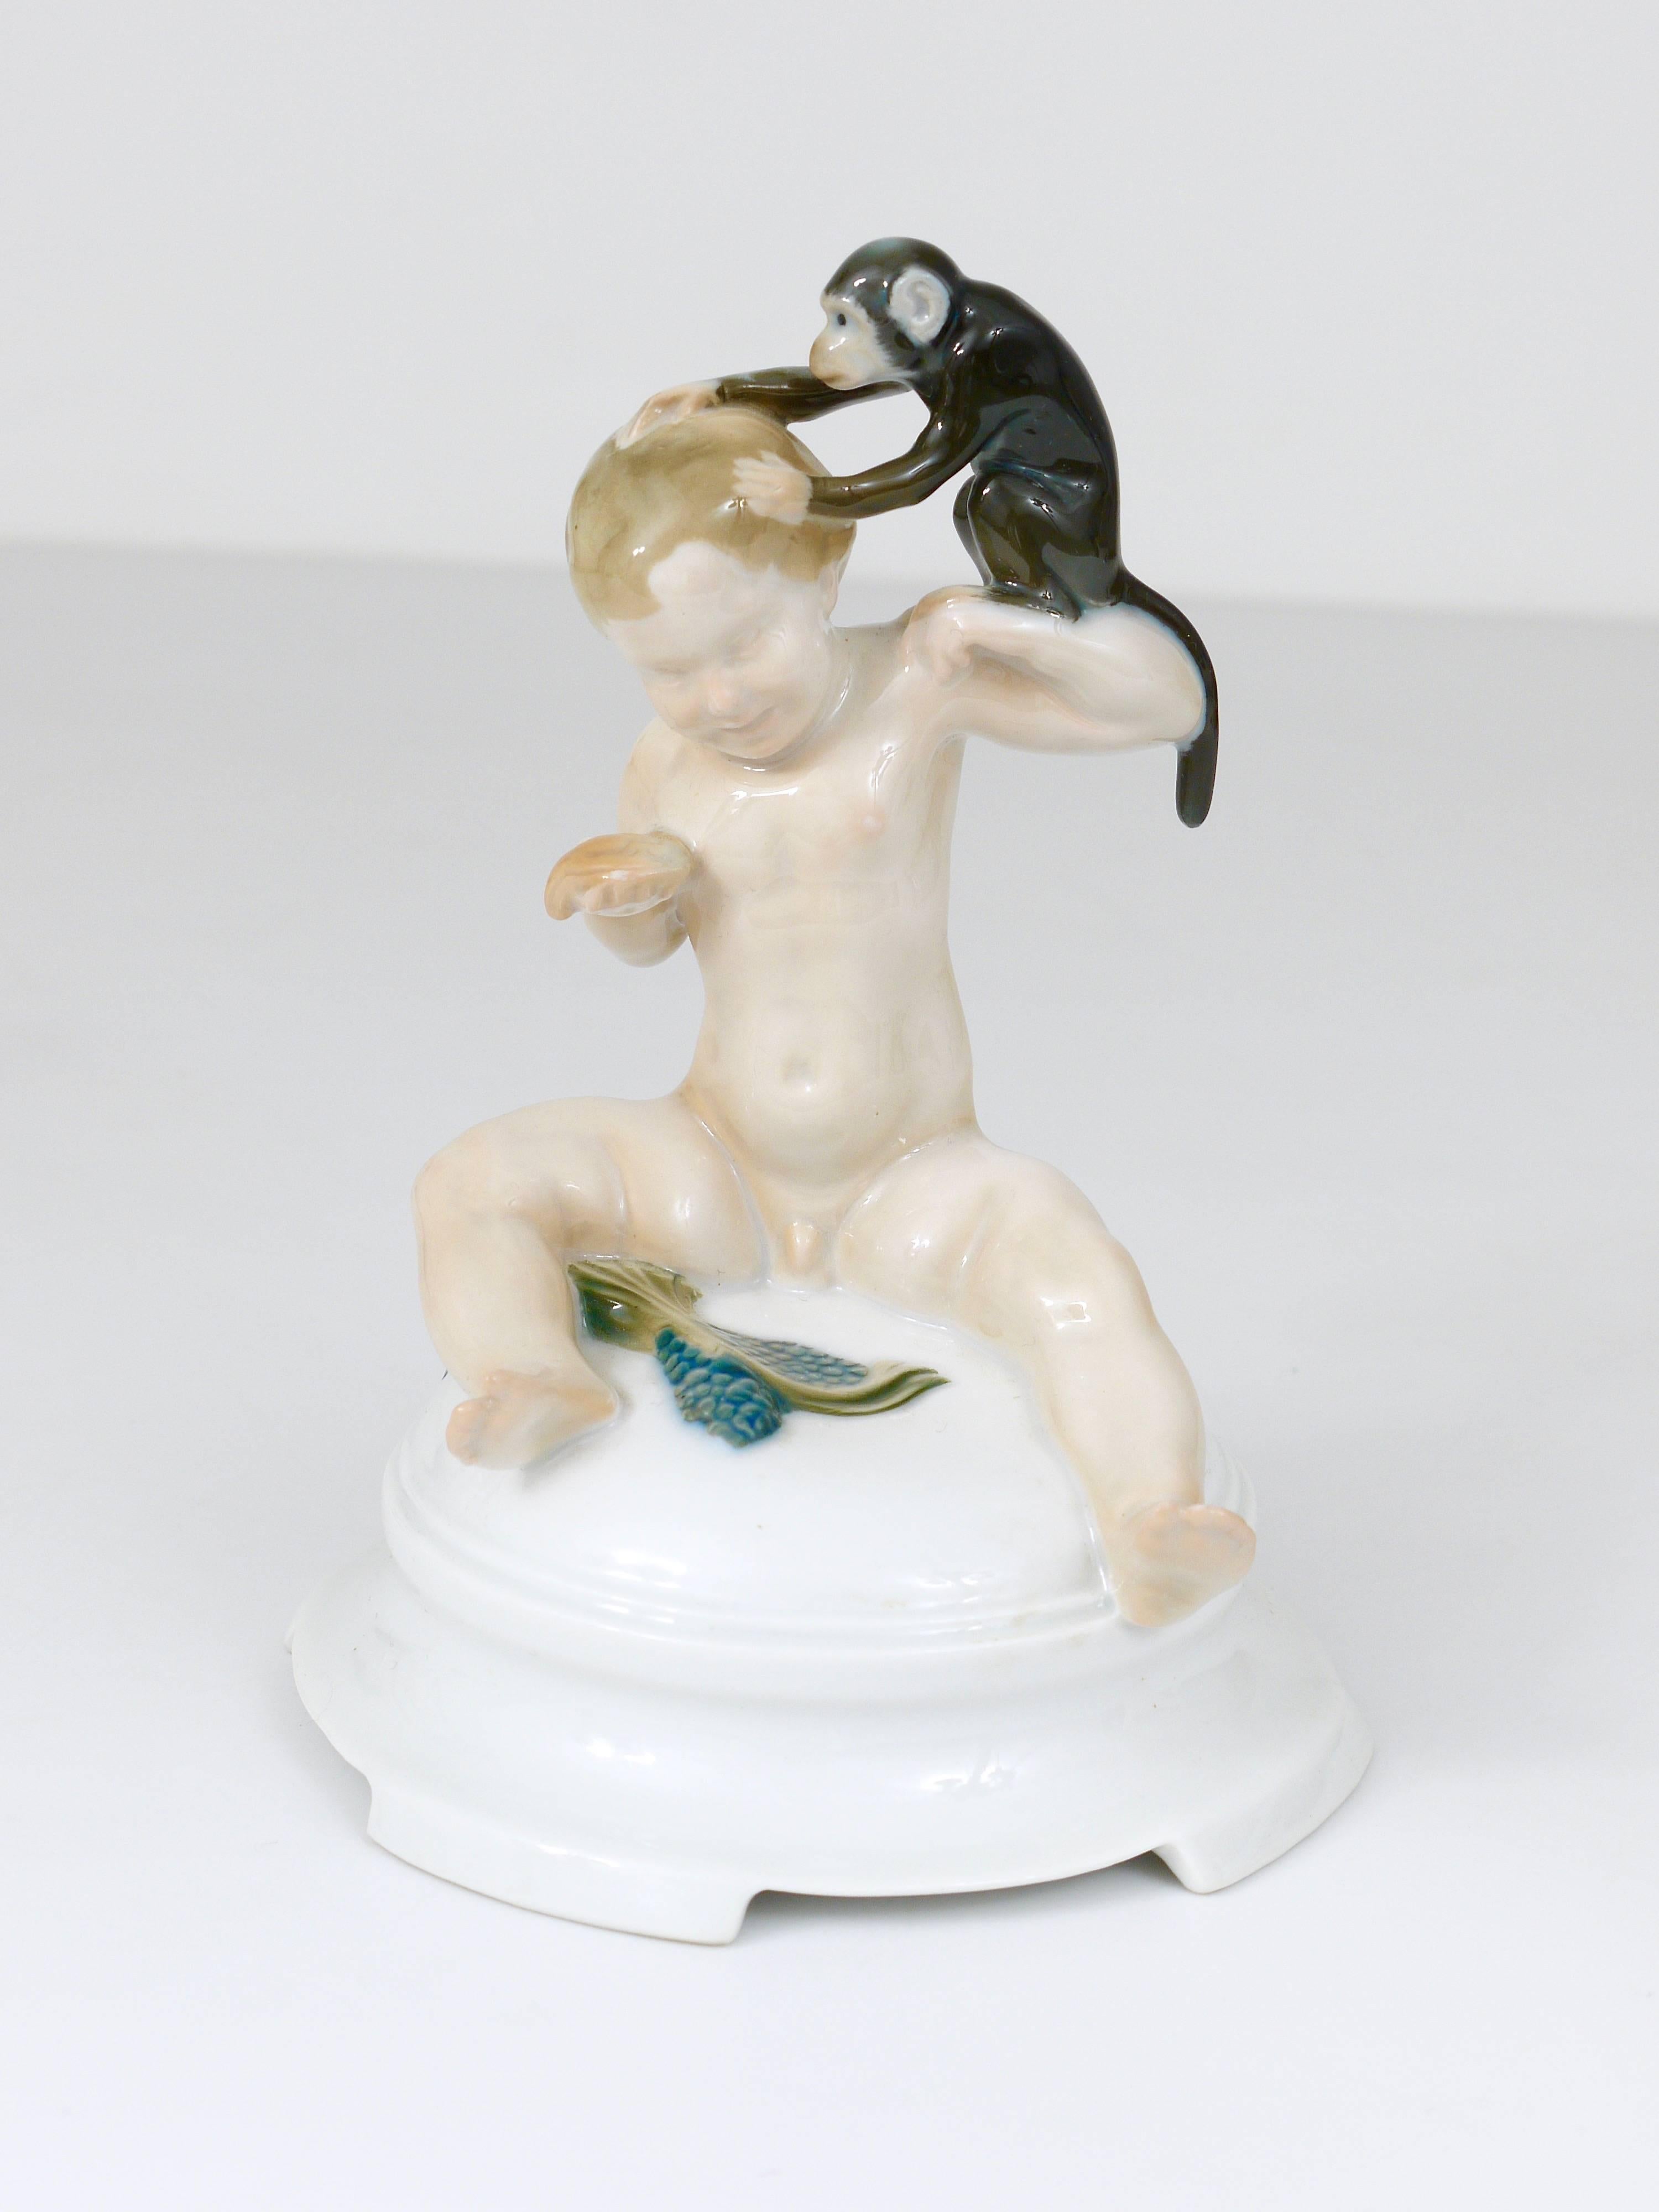 Early 20th Century 1910s Rosenthal Putto & Monkey Porcelain Sculpture by Ferdinand Liebermann For Sale